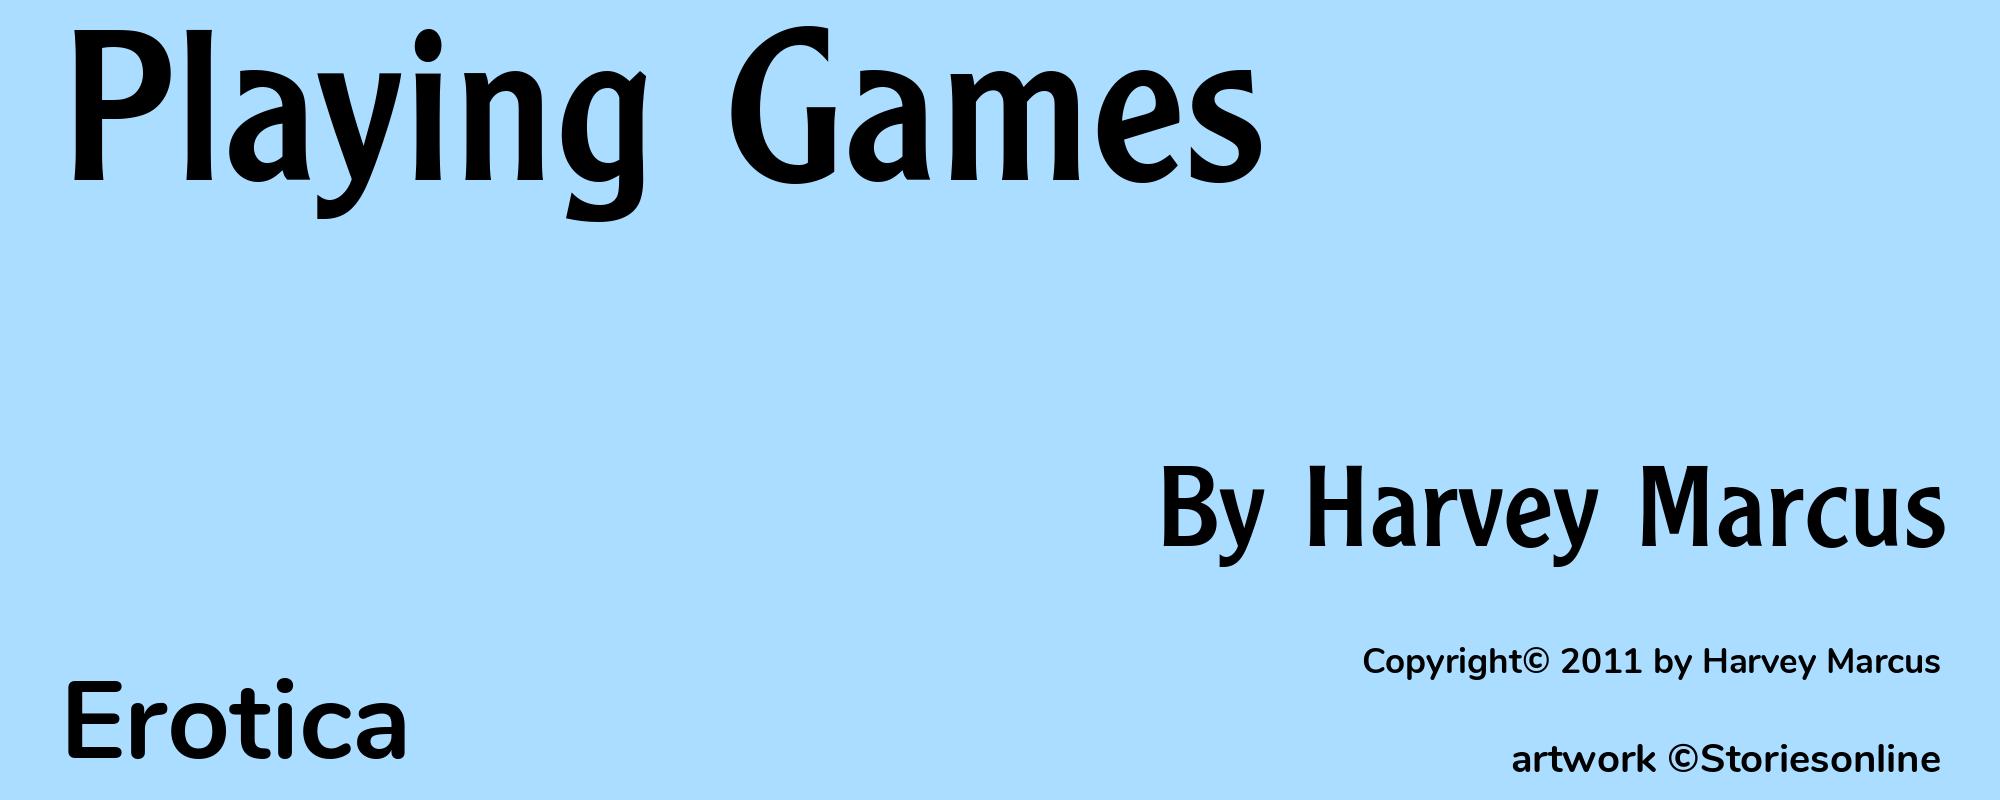 Playing Games - Cover